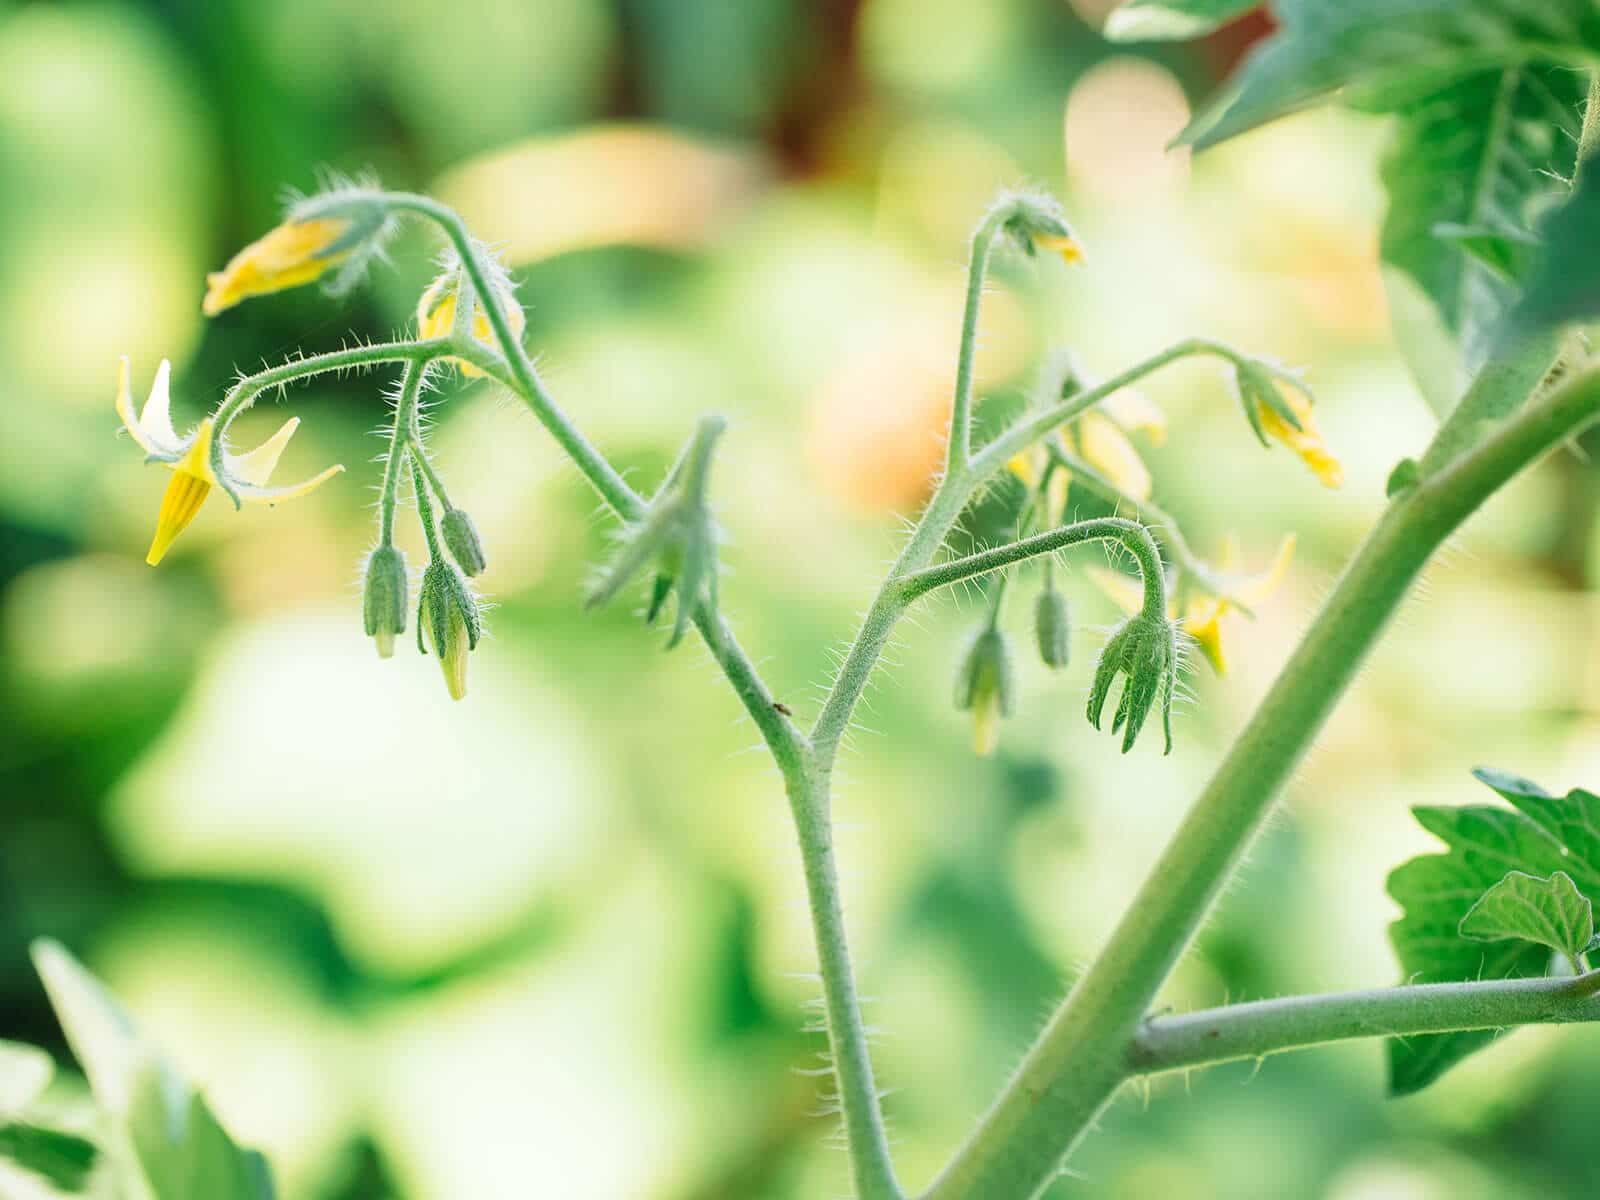 Young tomato plant with yellow blossoms